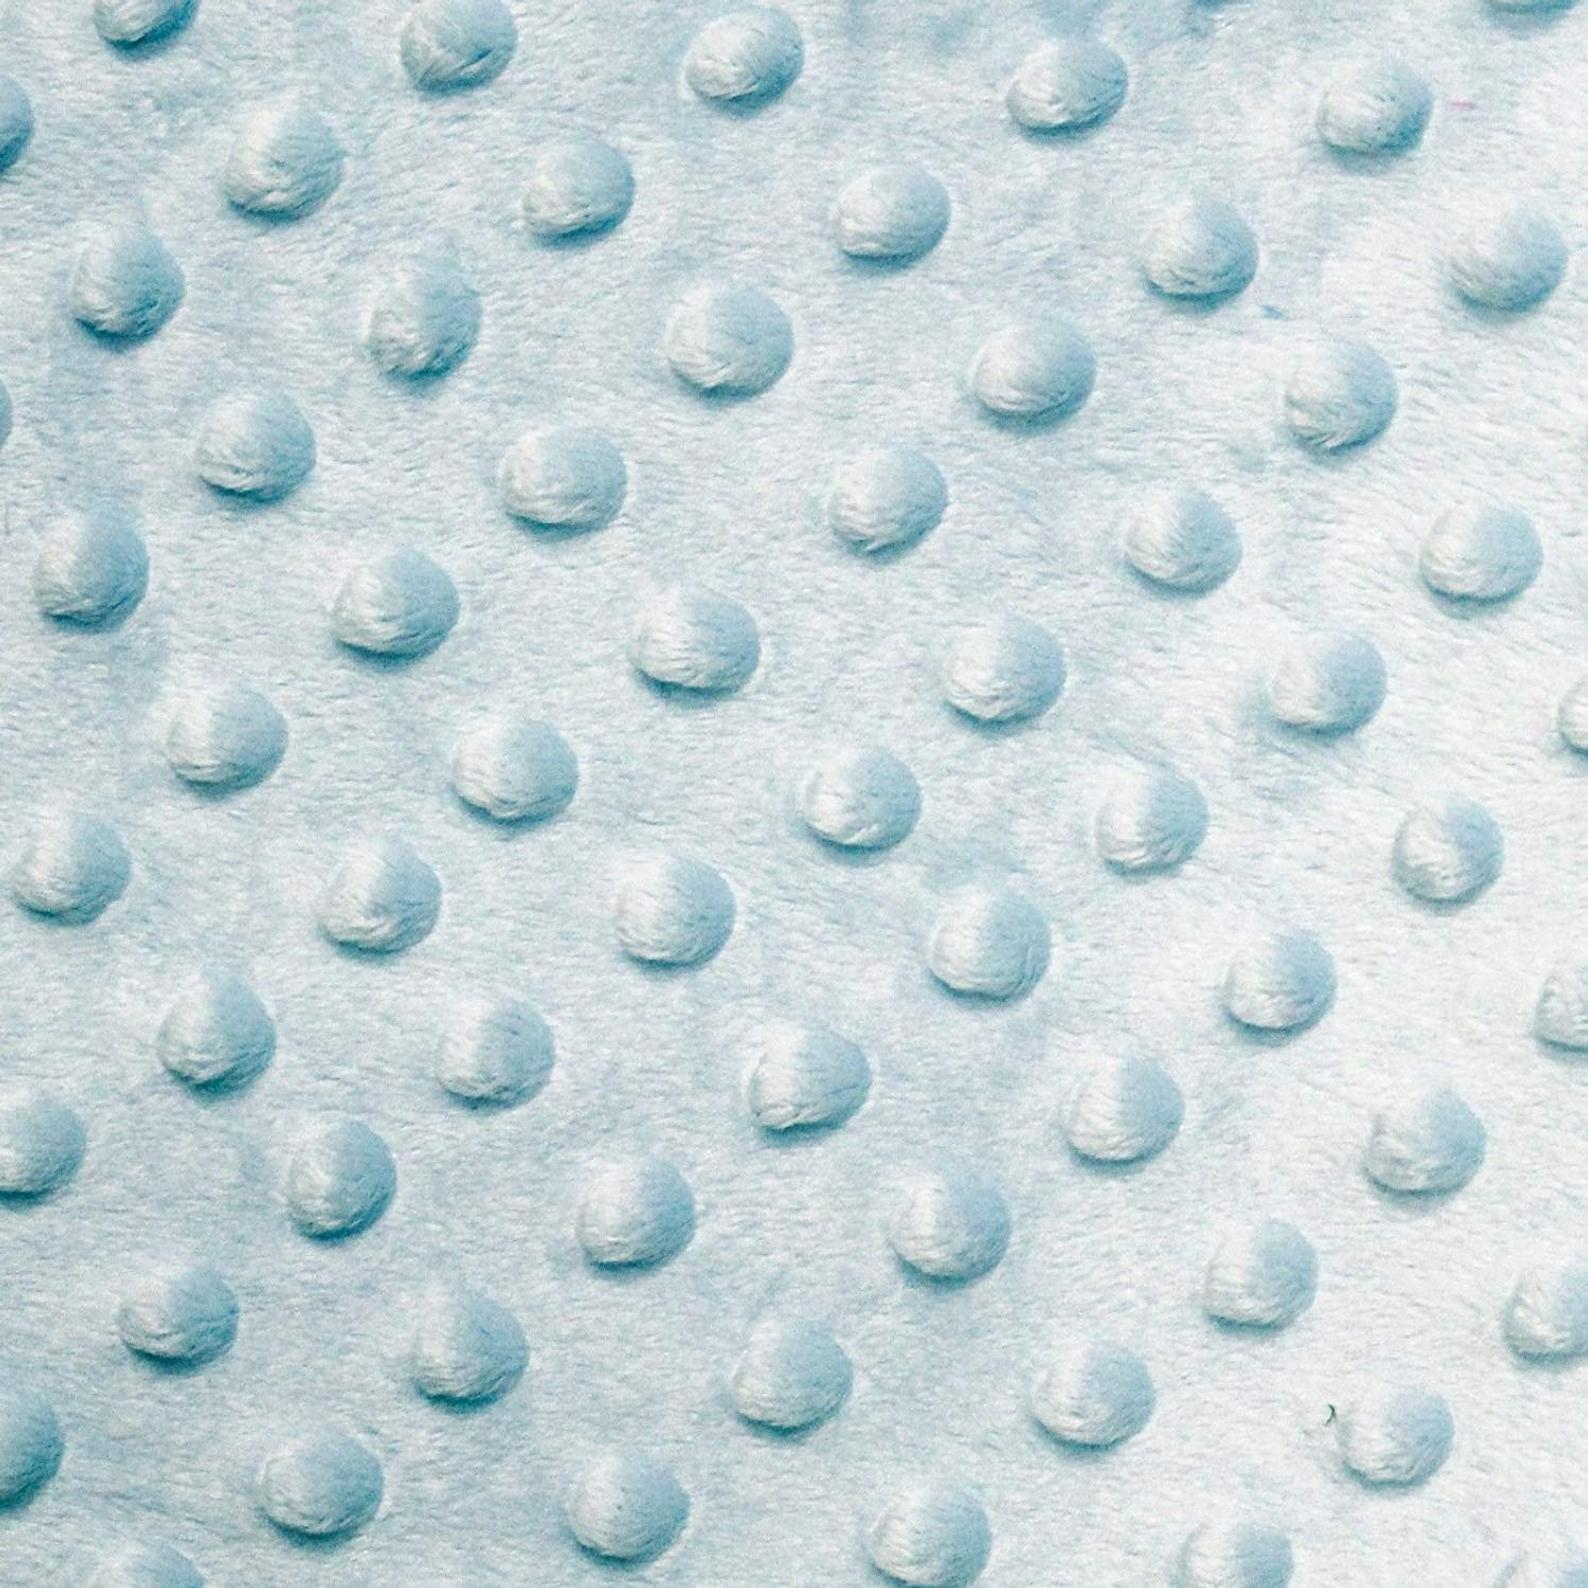 Bubble Polka Dot Minky Fabric By The Roll (20 Yards) Wholesale Fabric